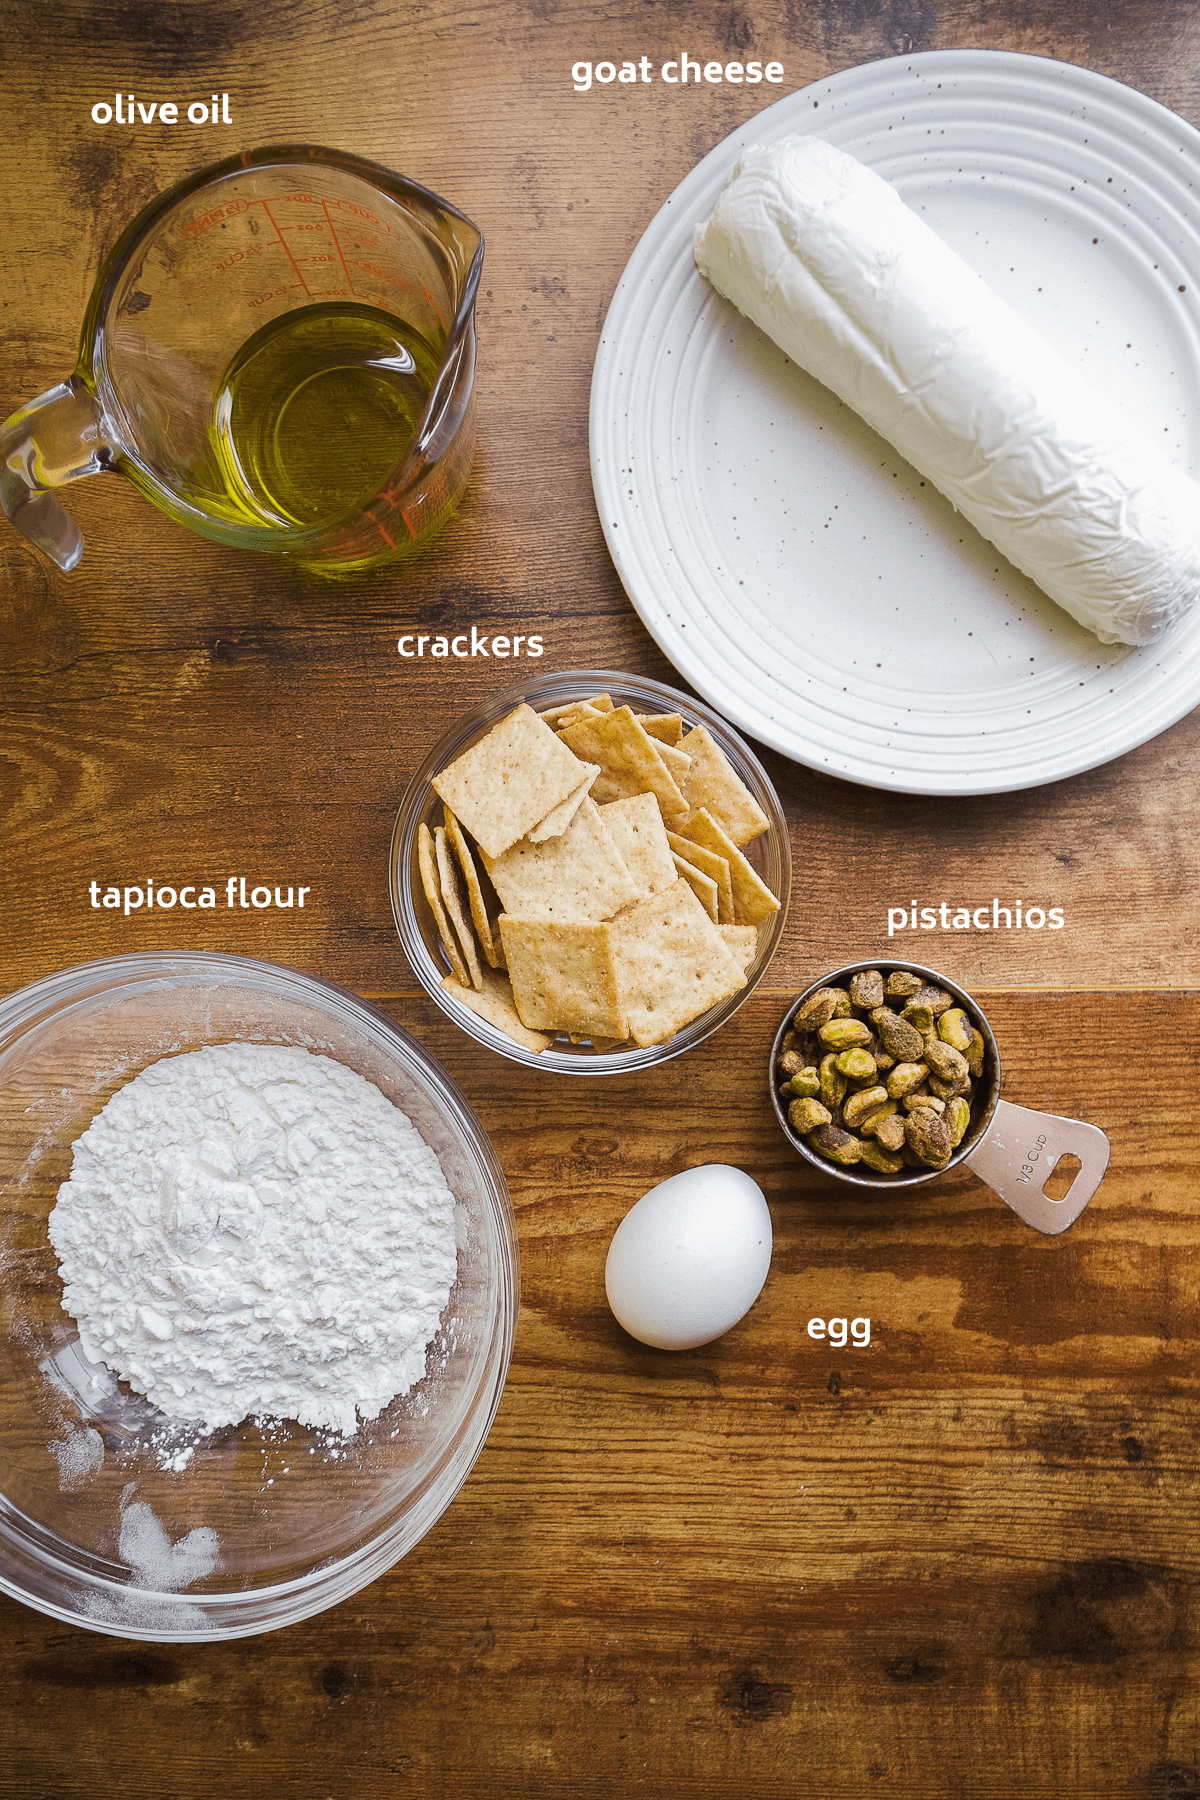 Fried goat cheese ball ingredients on a wooden surface.